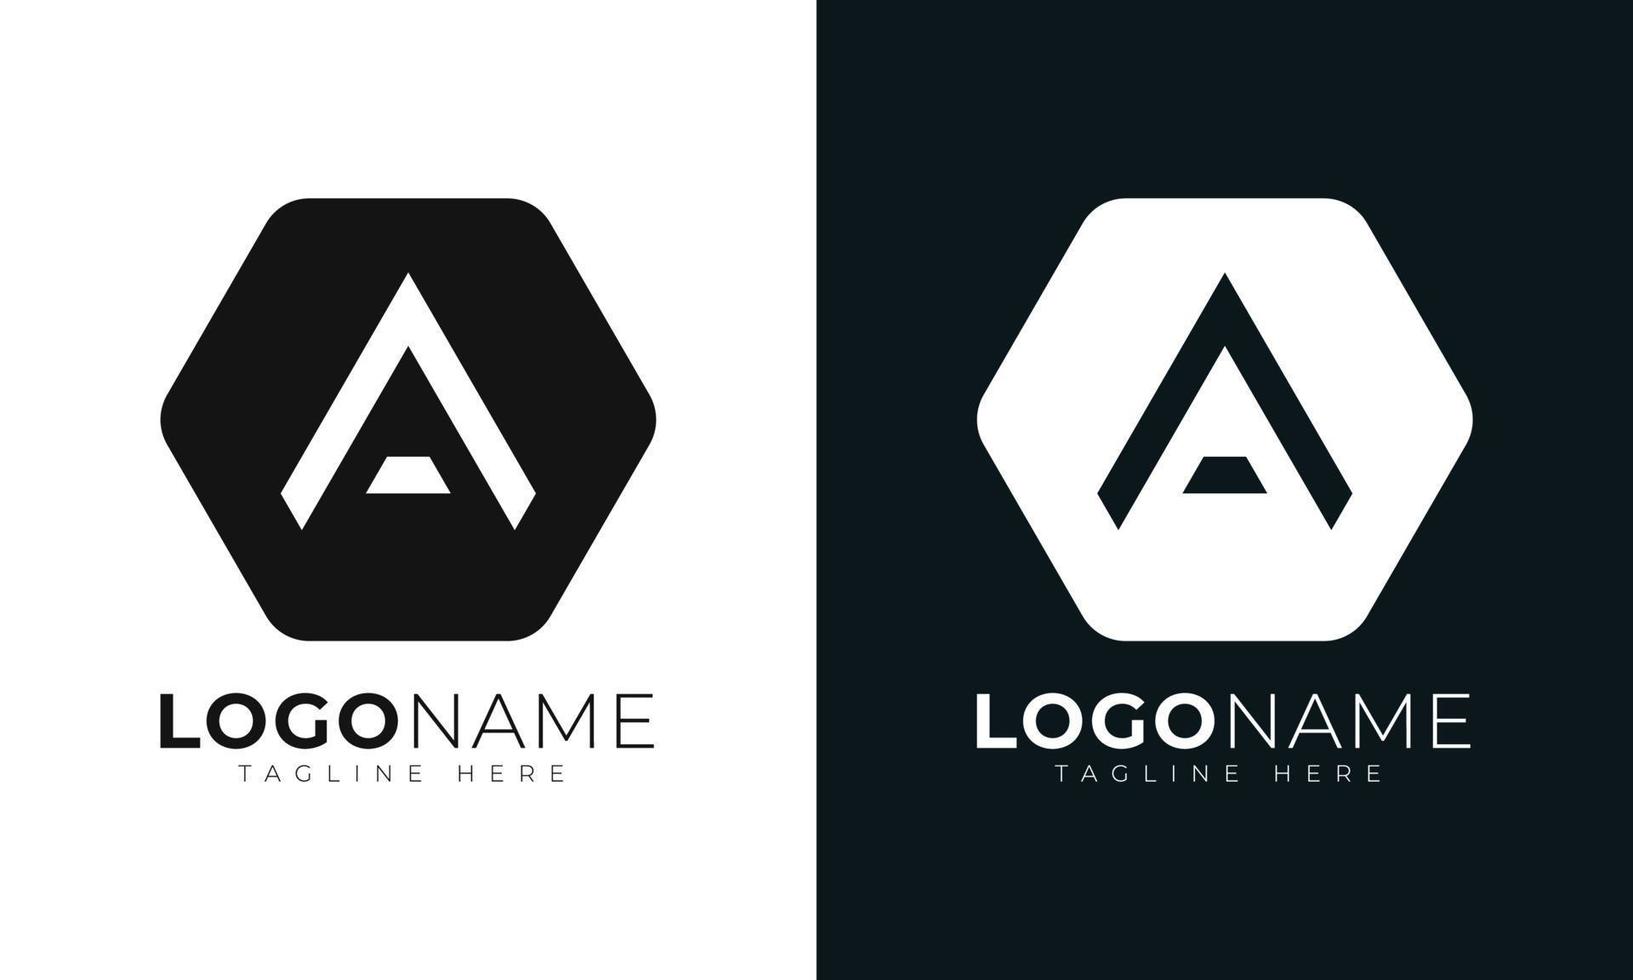 Initial letter a logo vector design template. With Hexagonal shape. Polygonal style